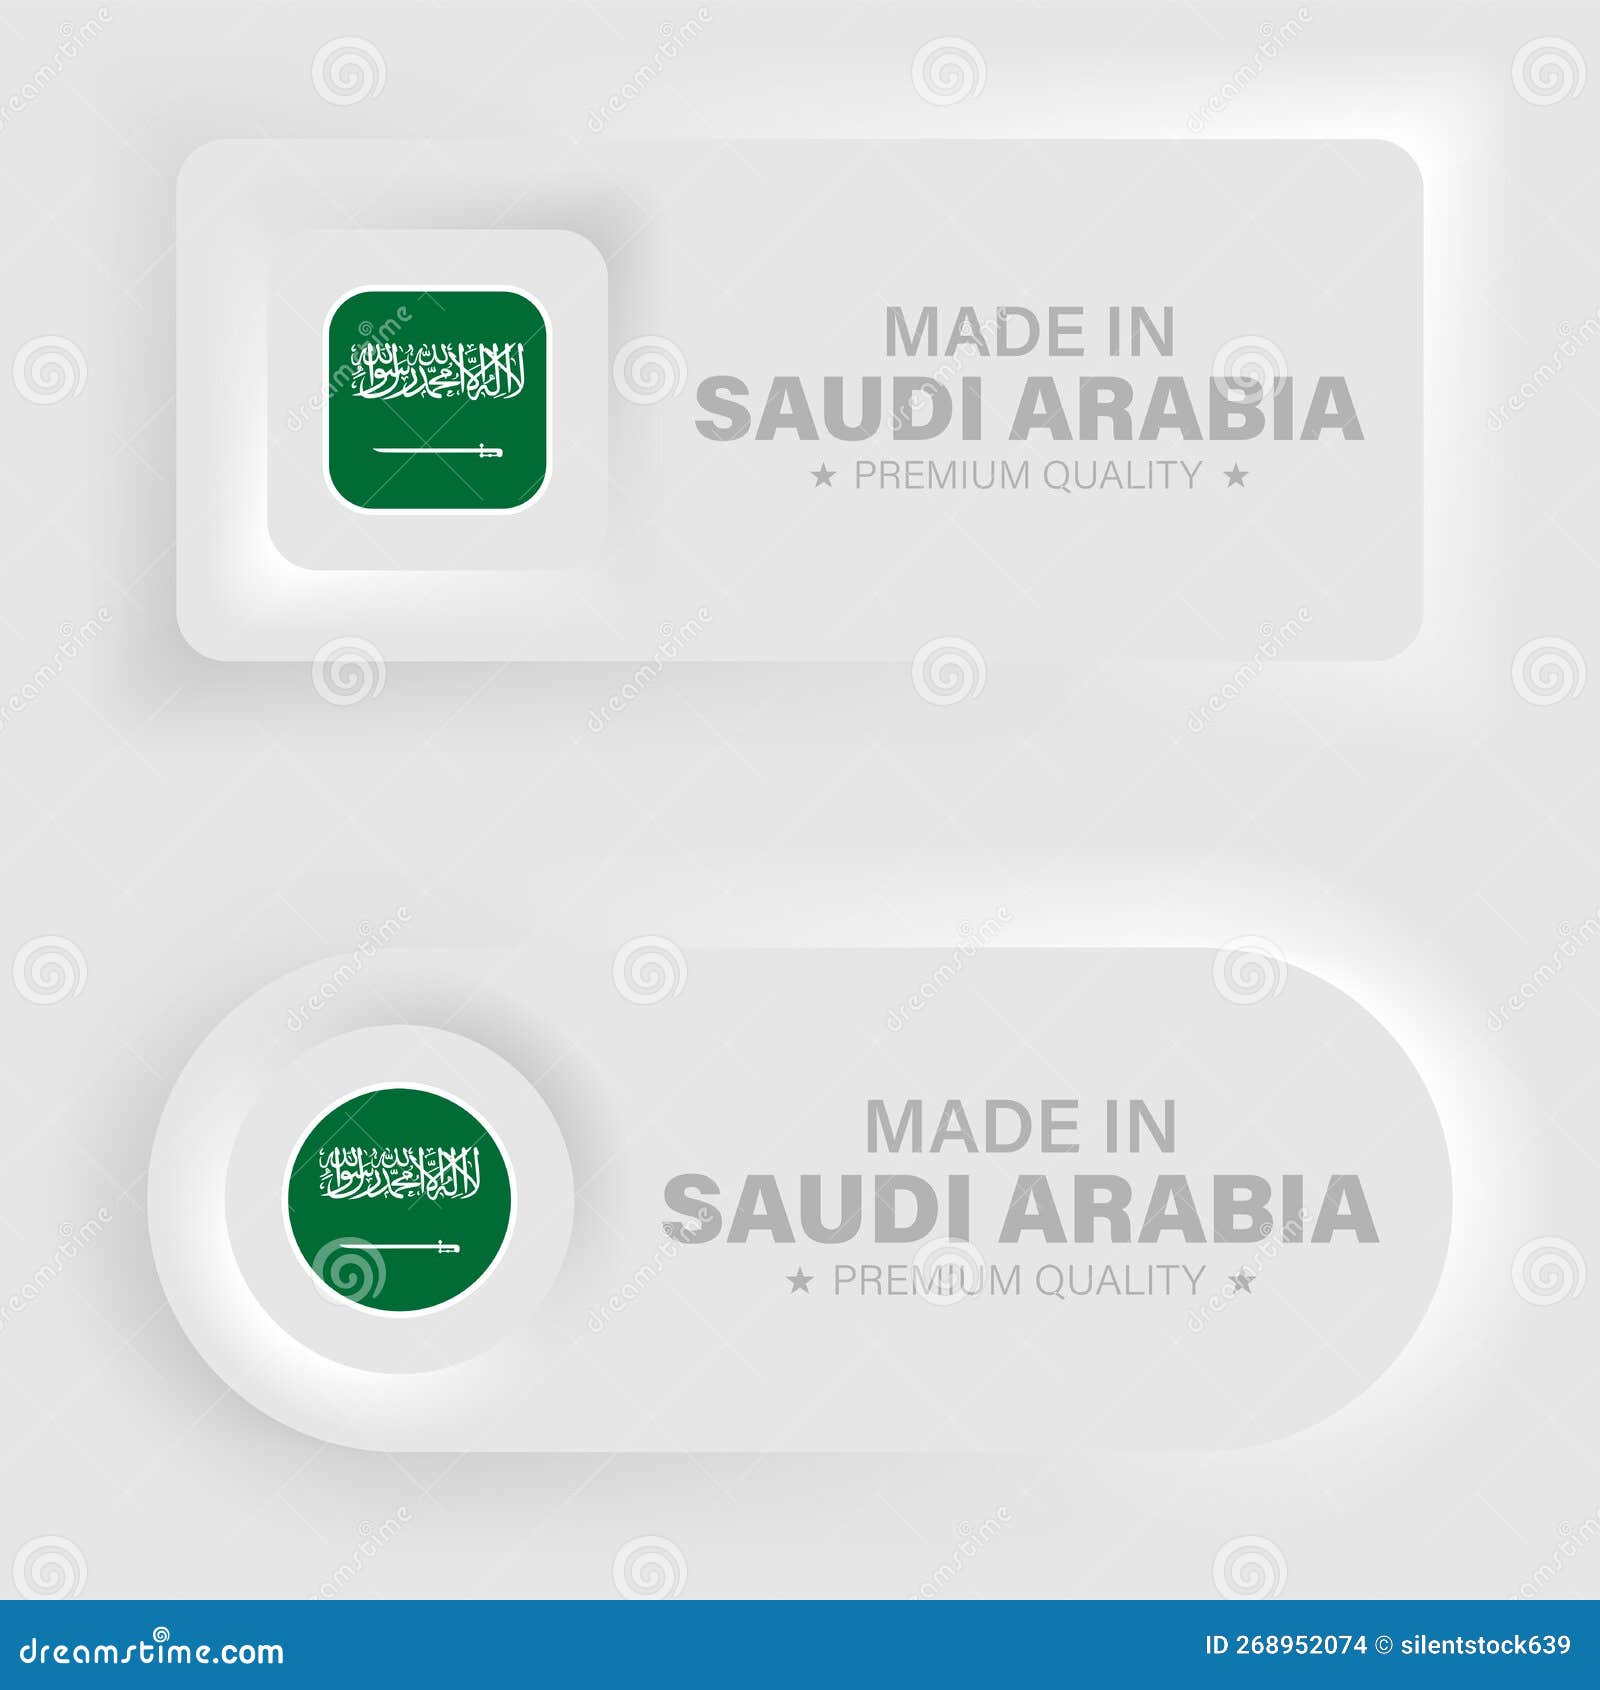 made in saudiarabia neumorphic graphic and label